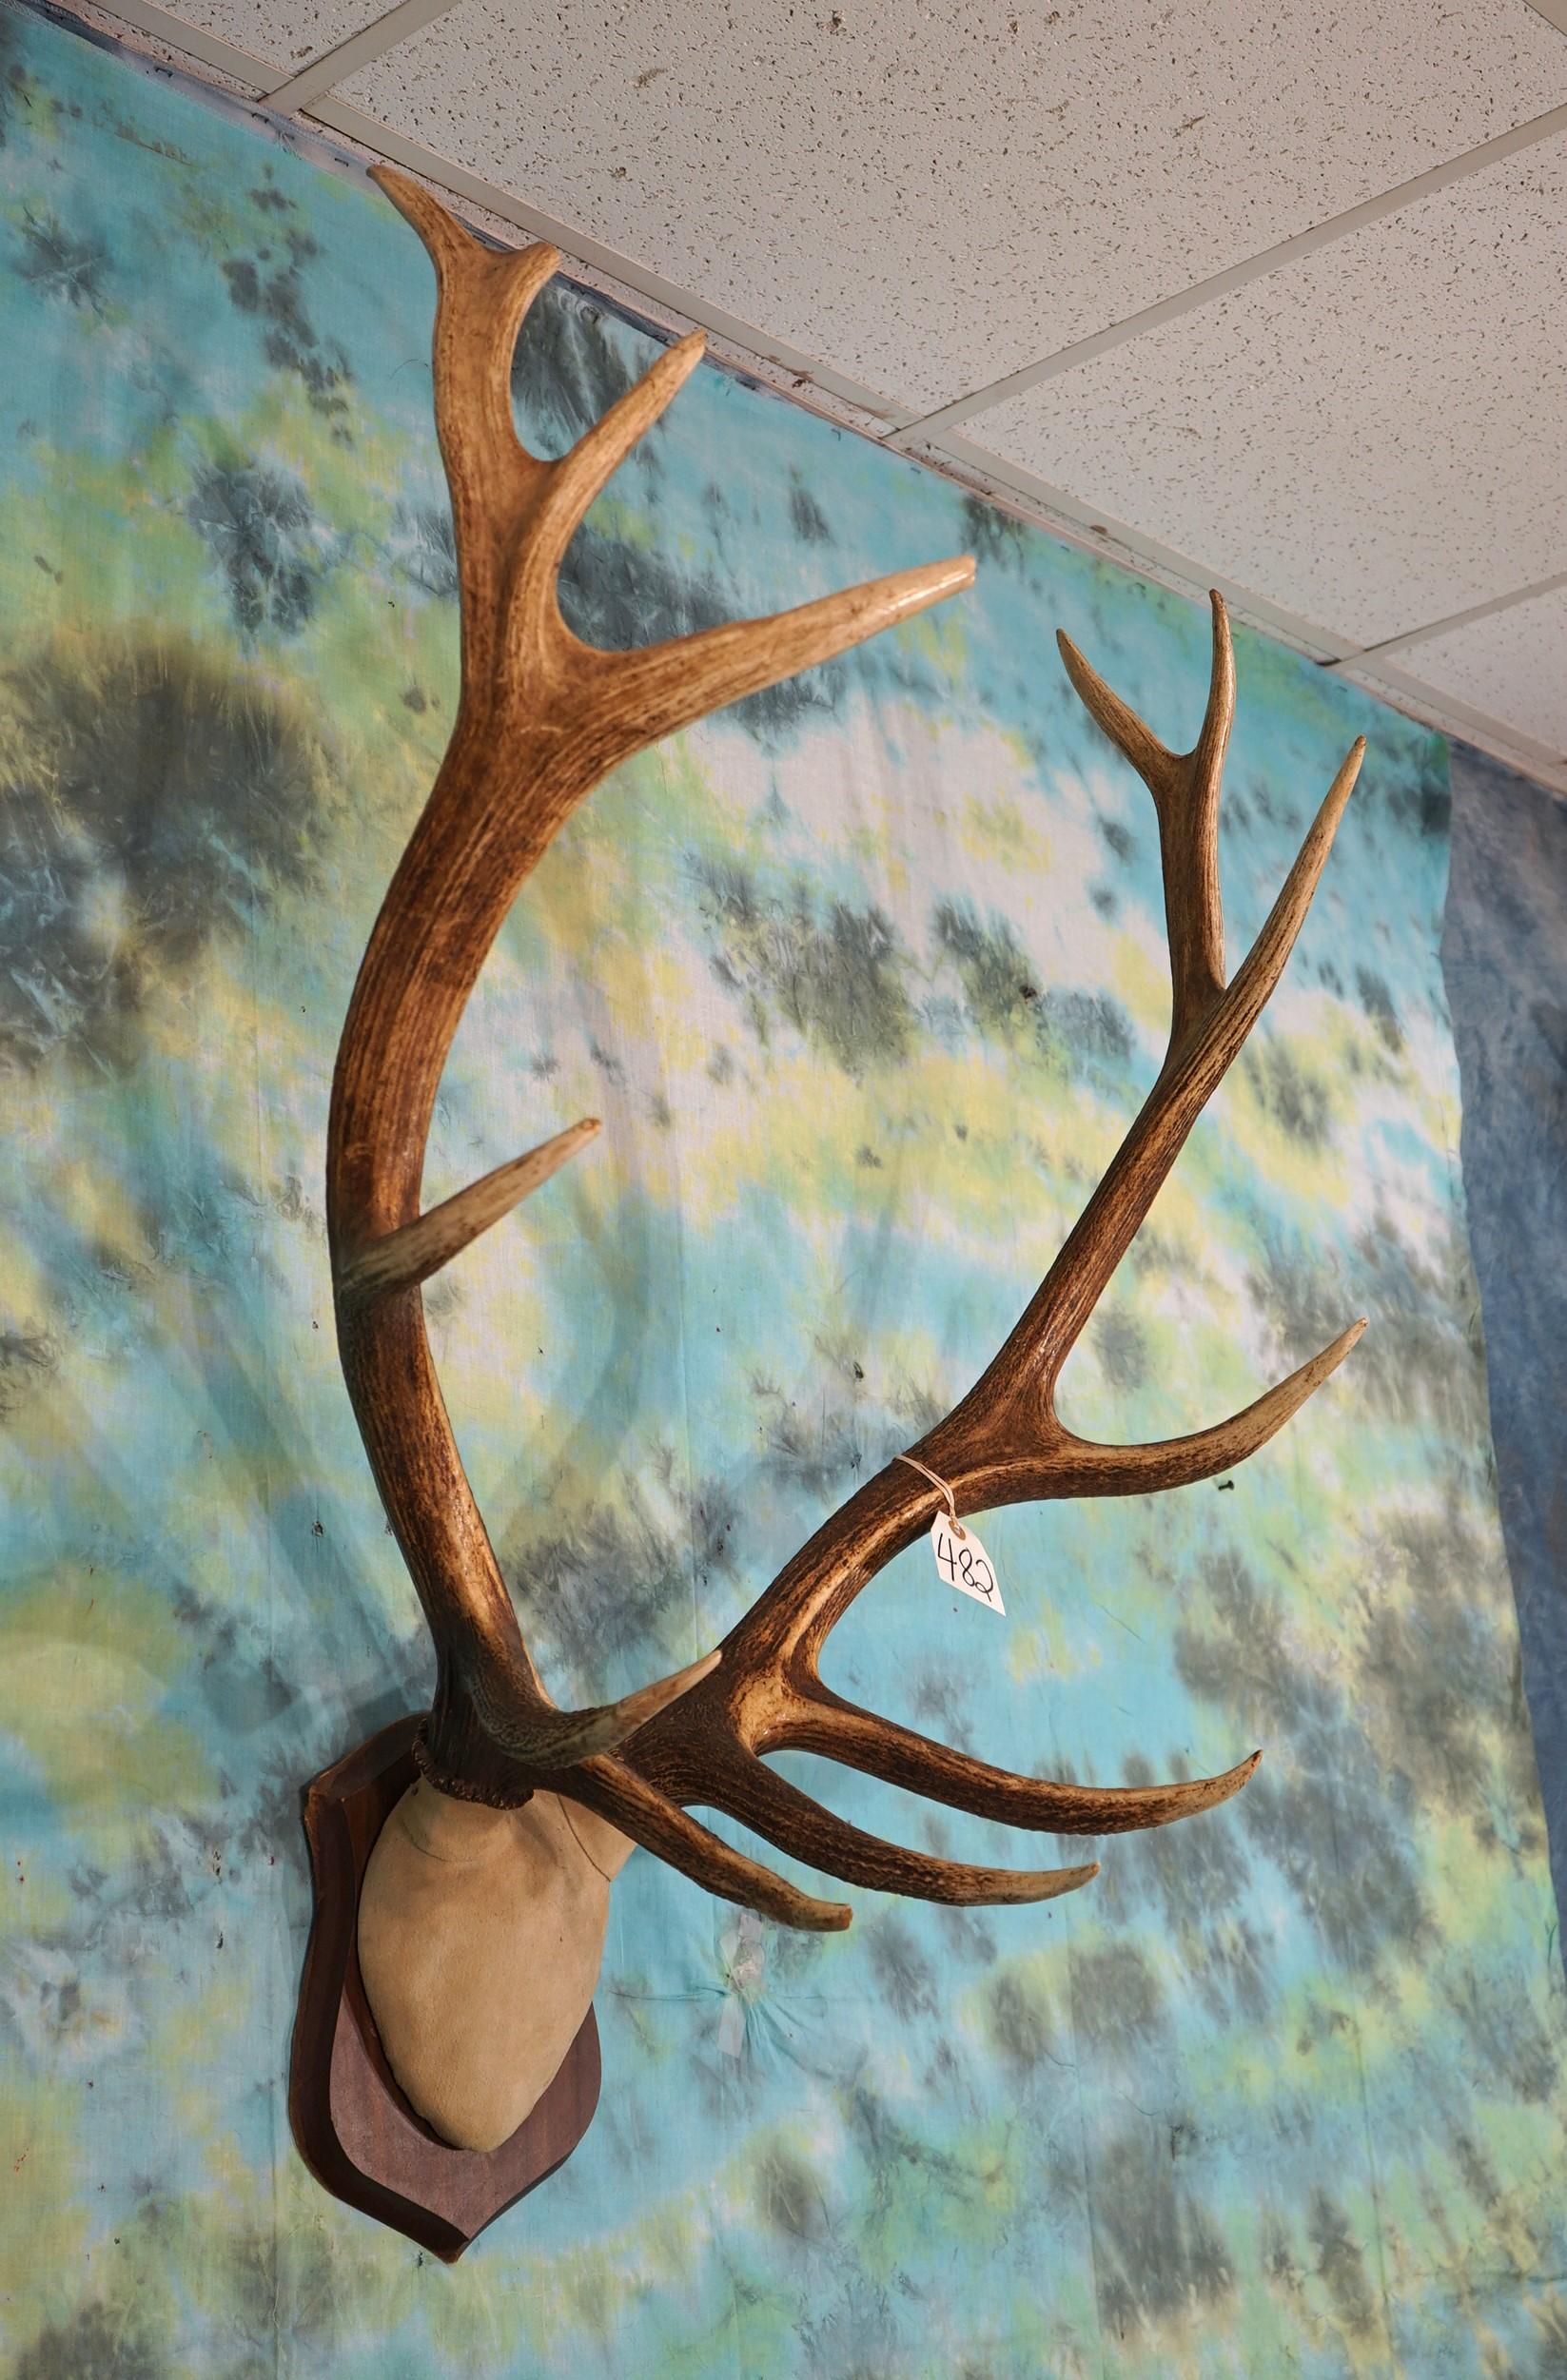 7 x 6 Elk Antlers mounted on Panel Taxidermy